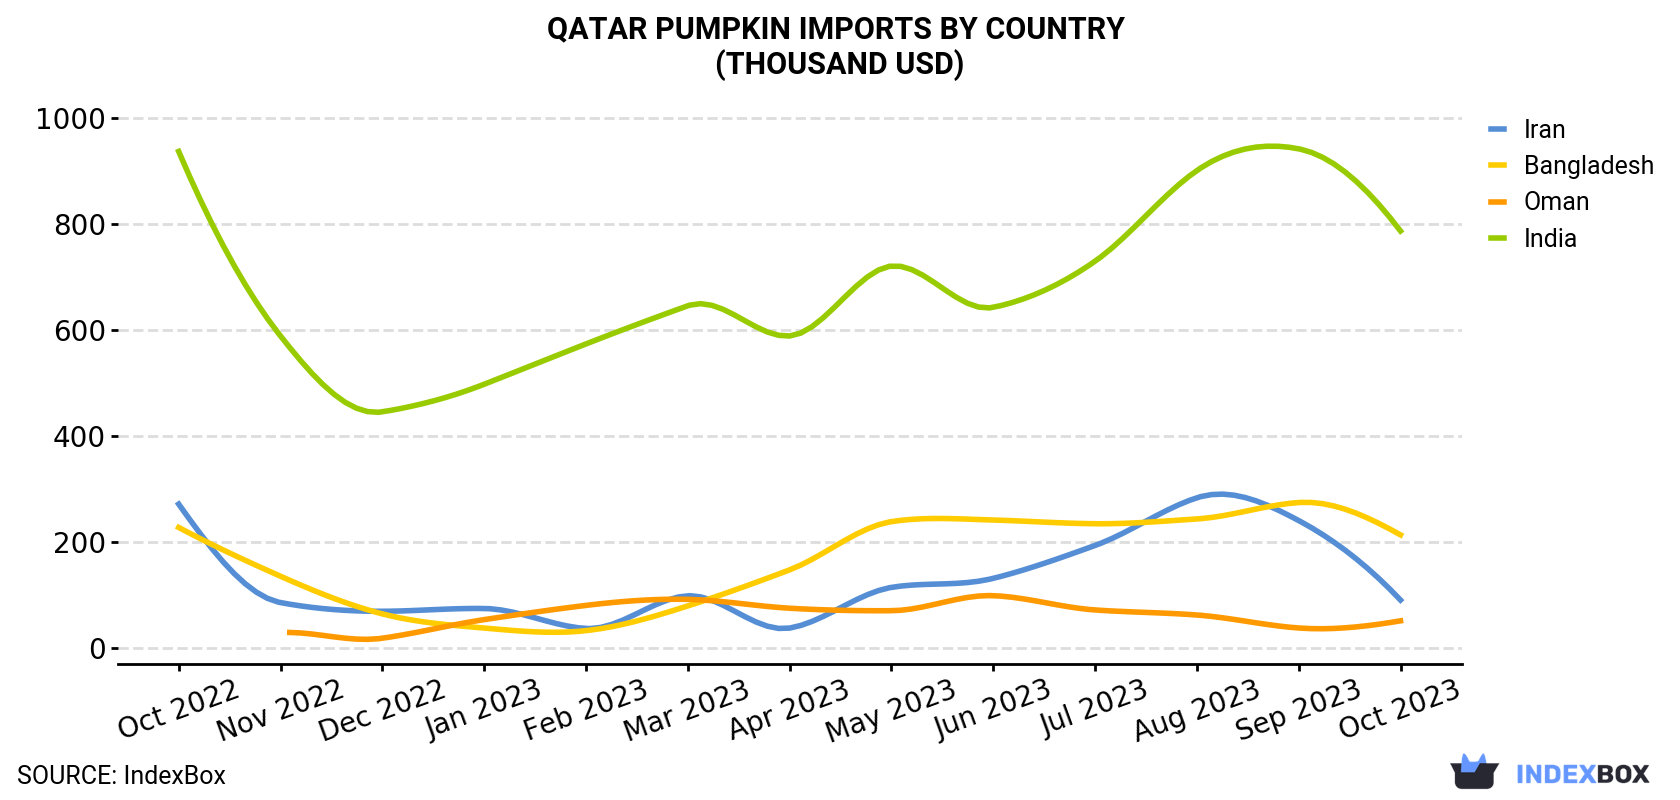 Qatar Pumpkin Imports By Country (Thousand USD)